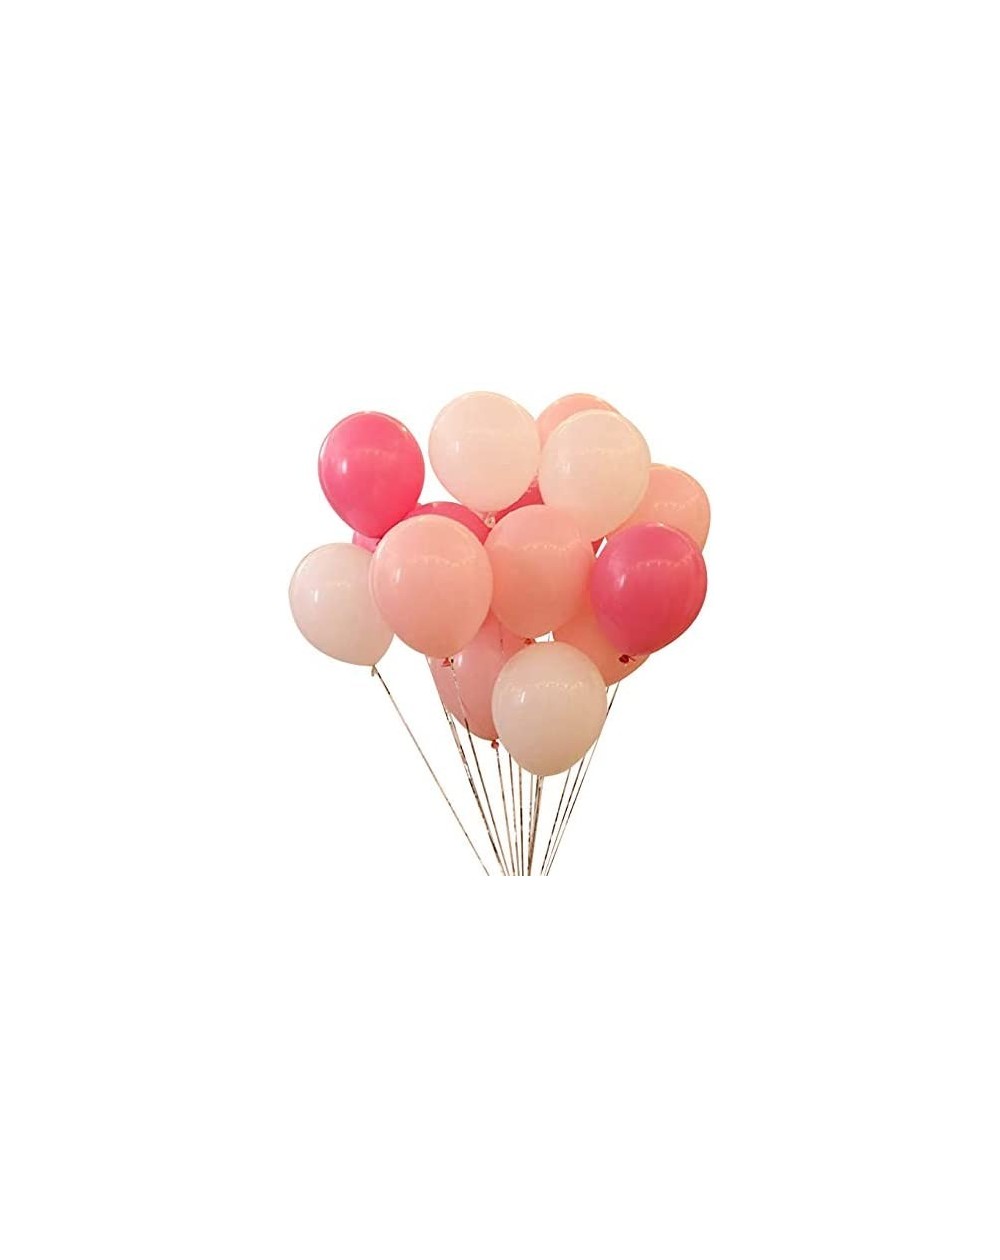 Balloons 50 pcs 12inch Pink and White Balloons- Pearl Latex Balloons (Light Pink Balloons/Dark Pink Balloons/White Balloons) ...